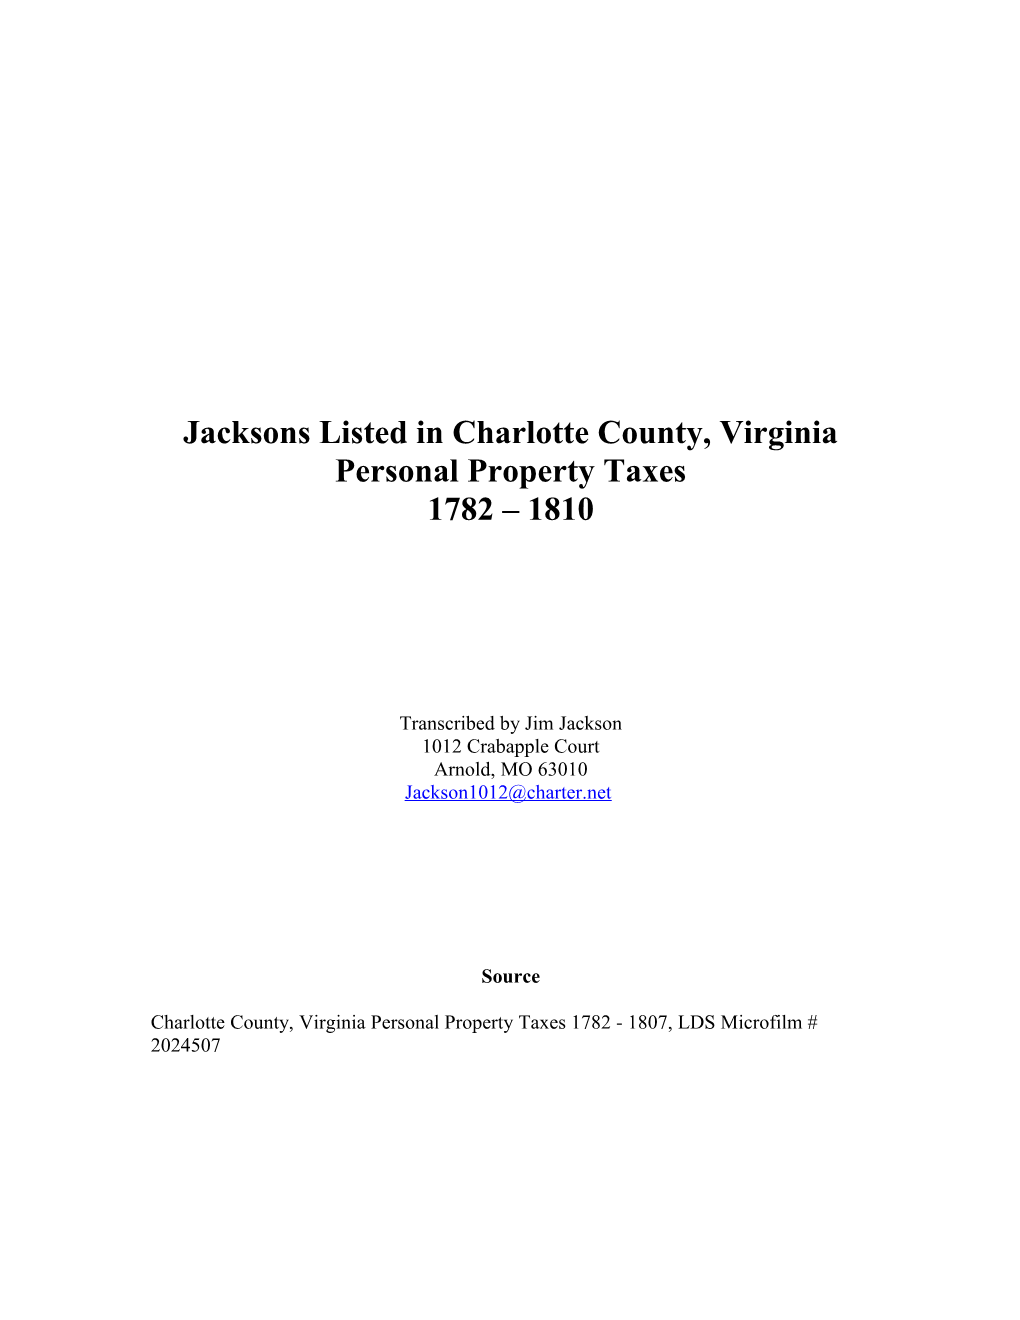 Jacksons Listed in Charlote County, Virginia